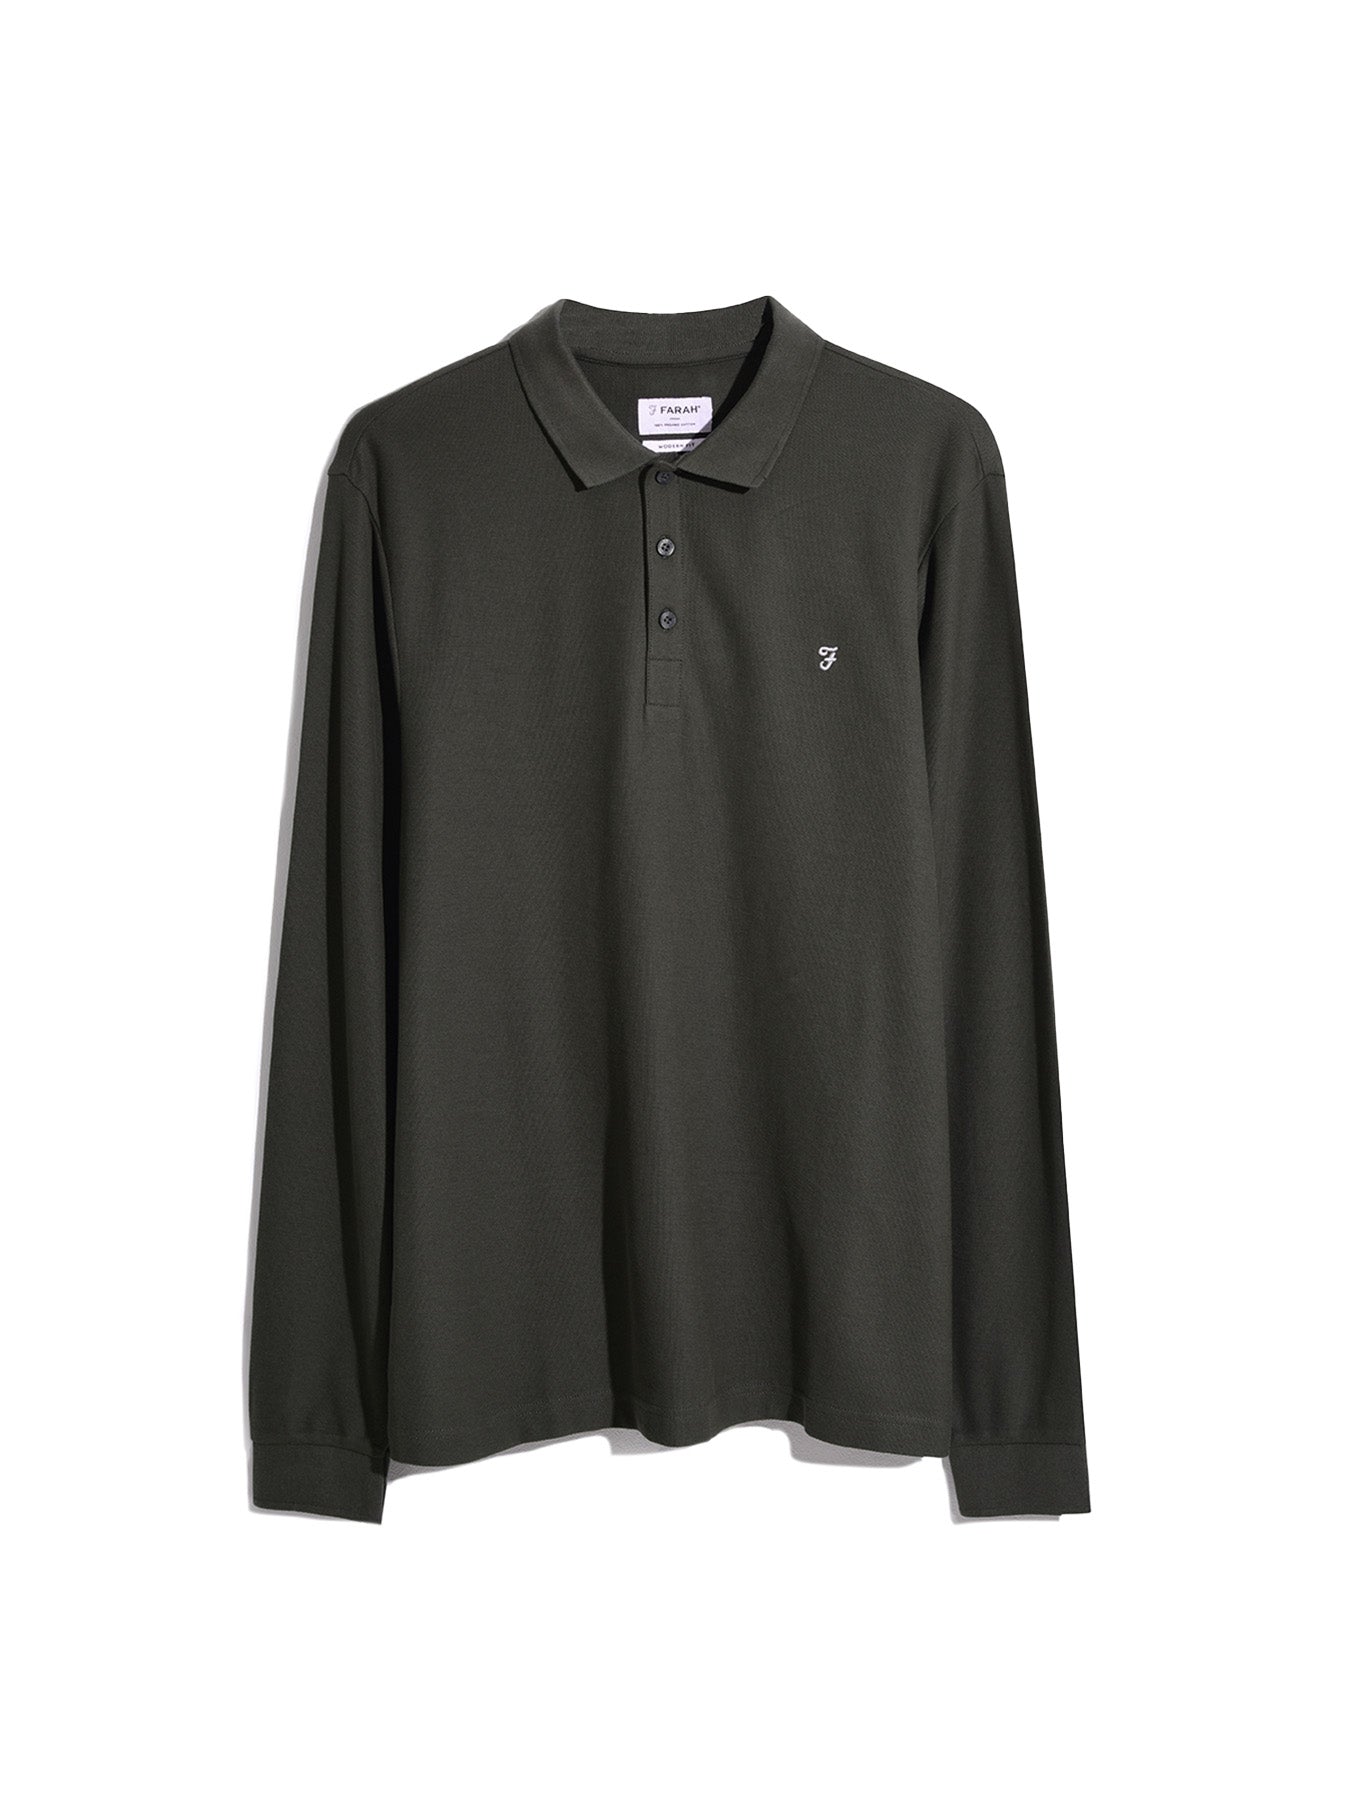 View Newcastle Long Sleeve Polo Shirt In Dark Olive information